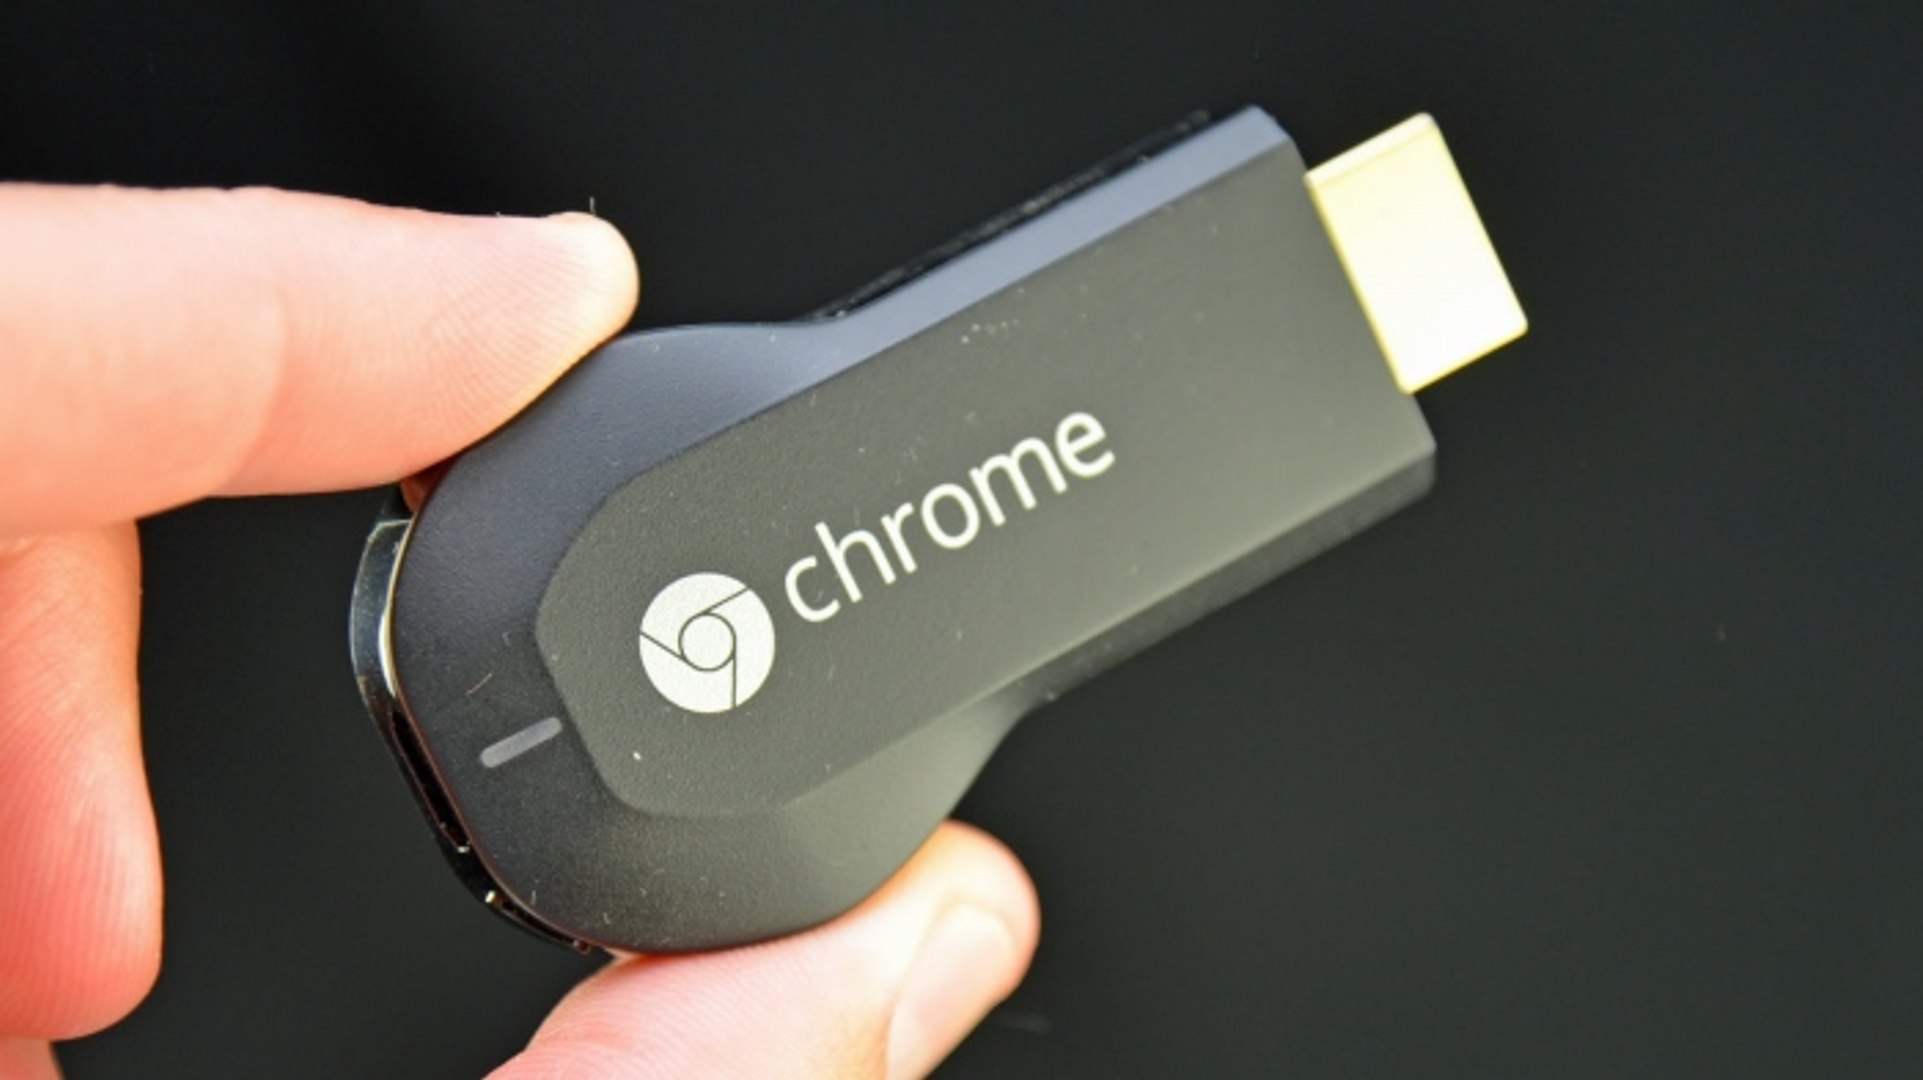 How to Setup Chromecast With Using Your Phone - video